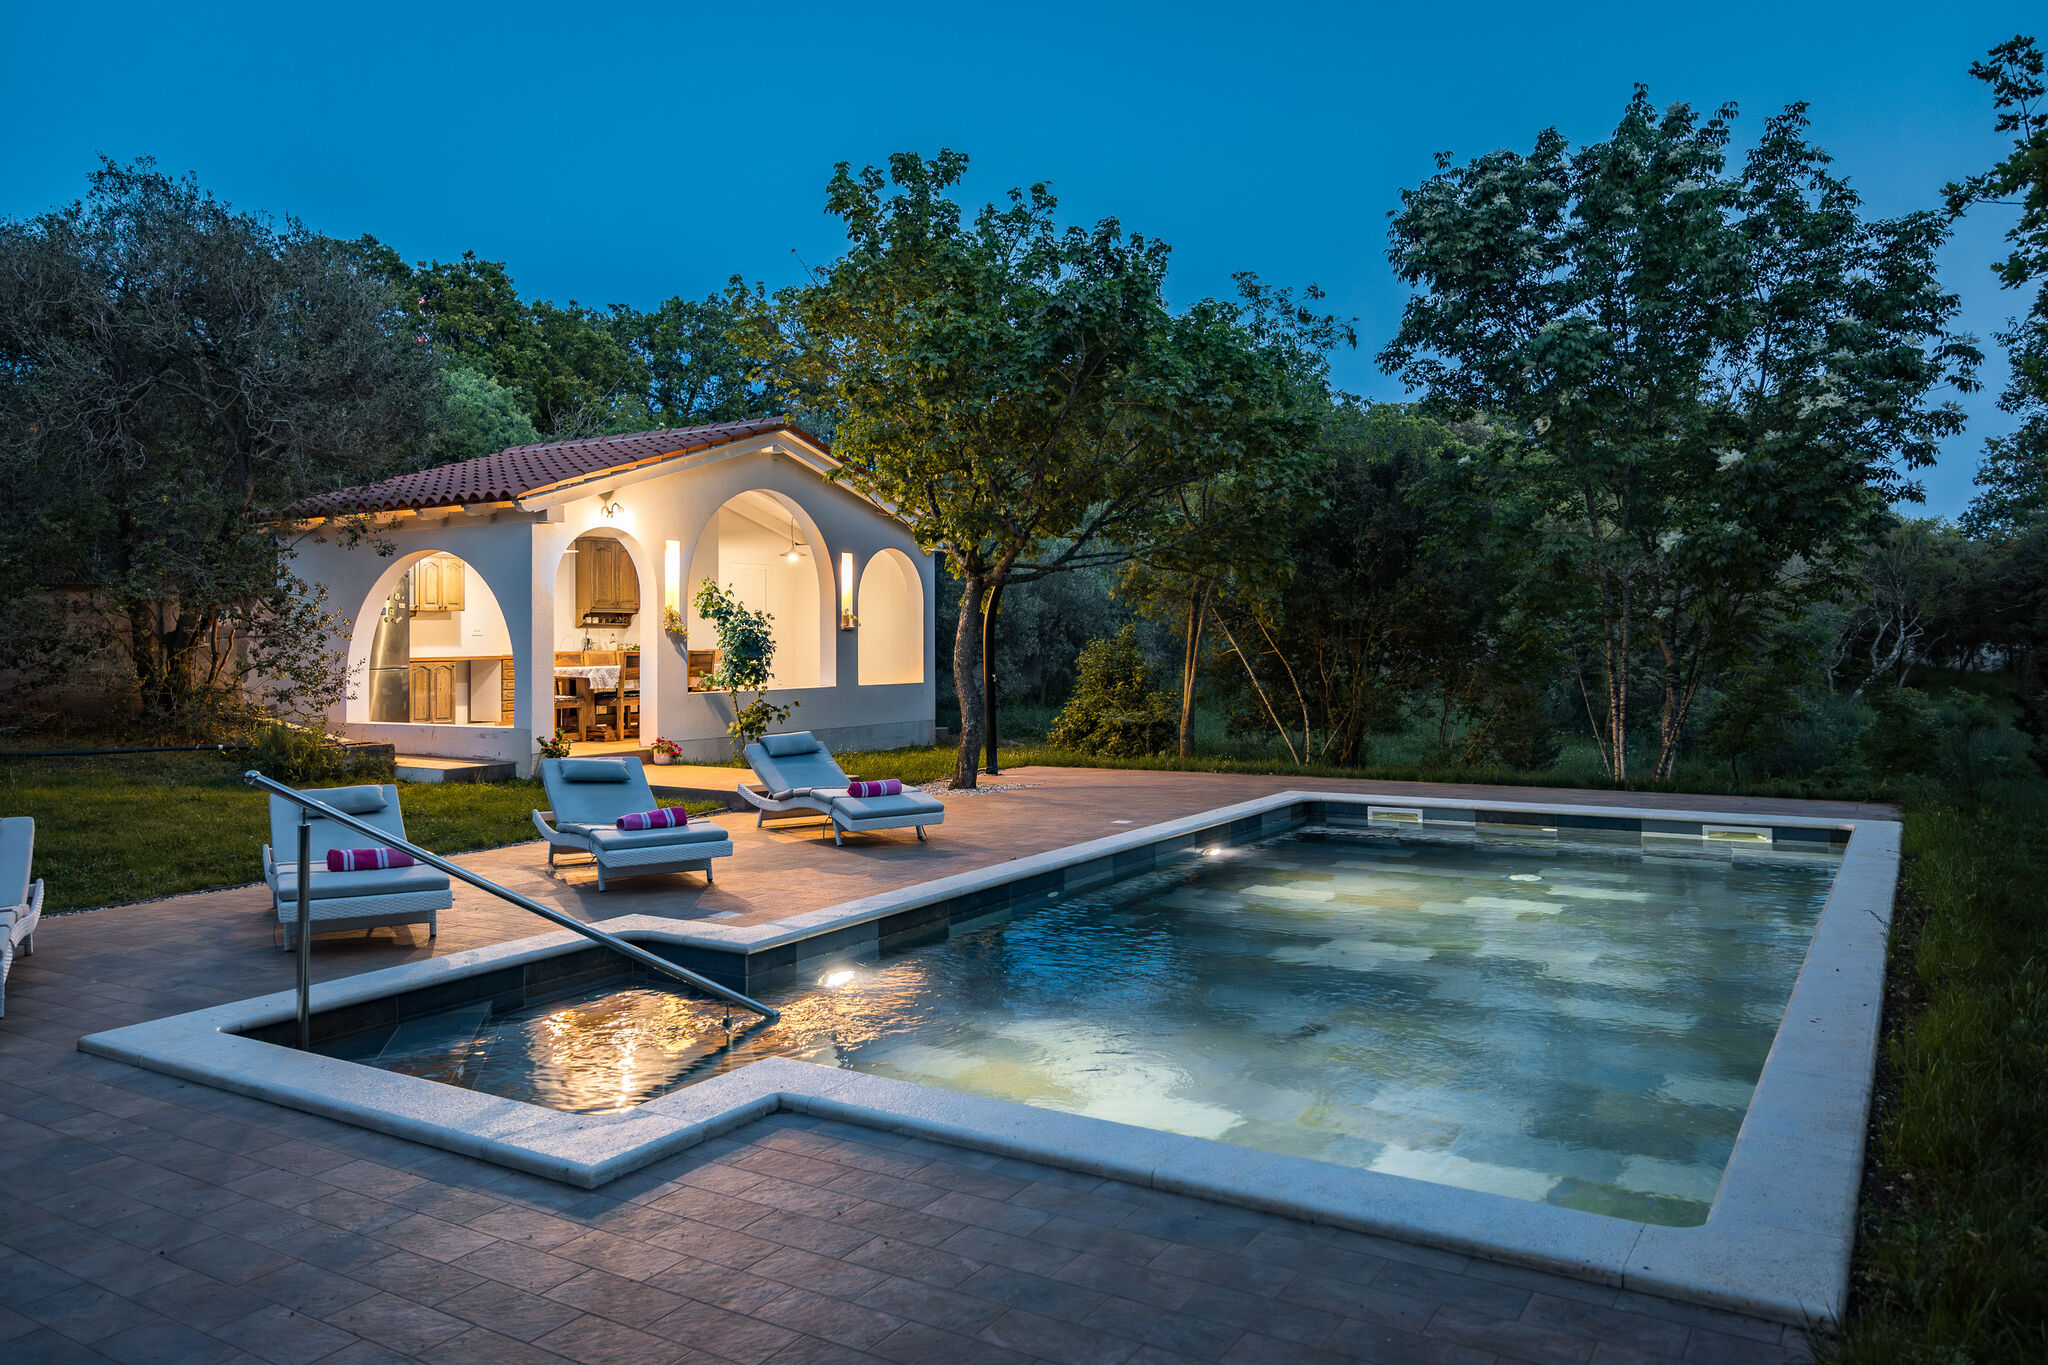 Beautiful villa with a pool and a fenced garden